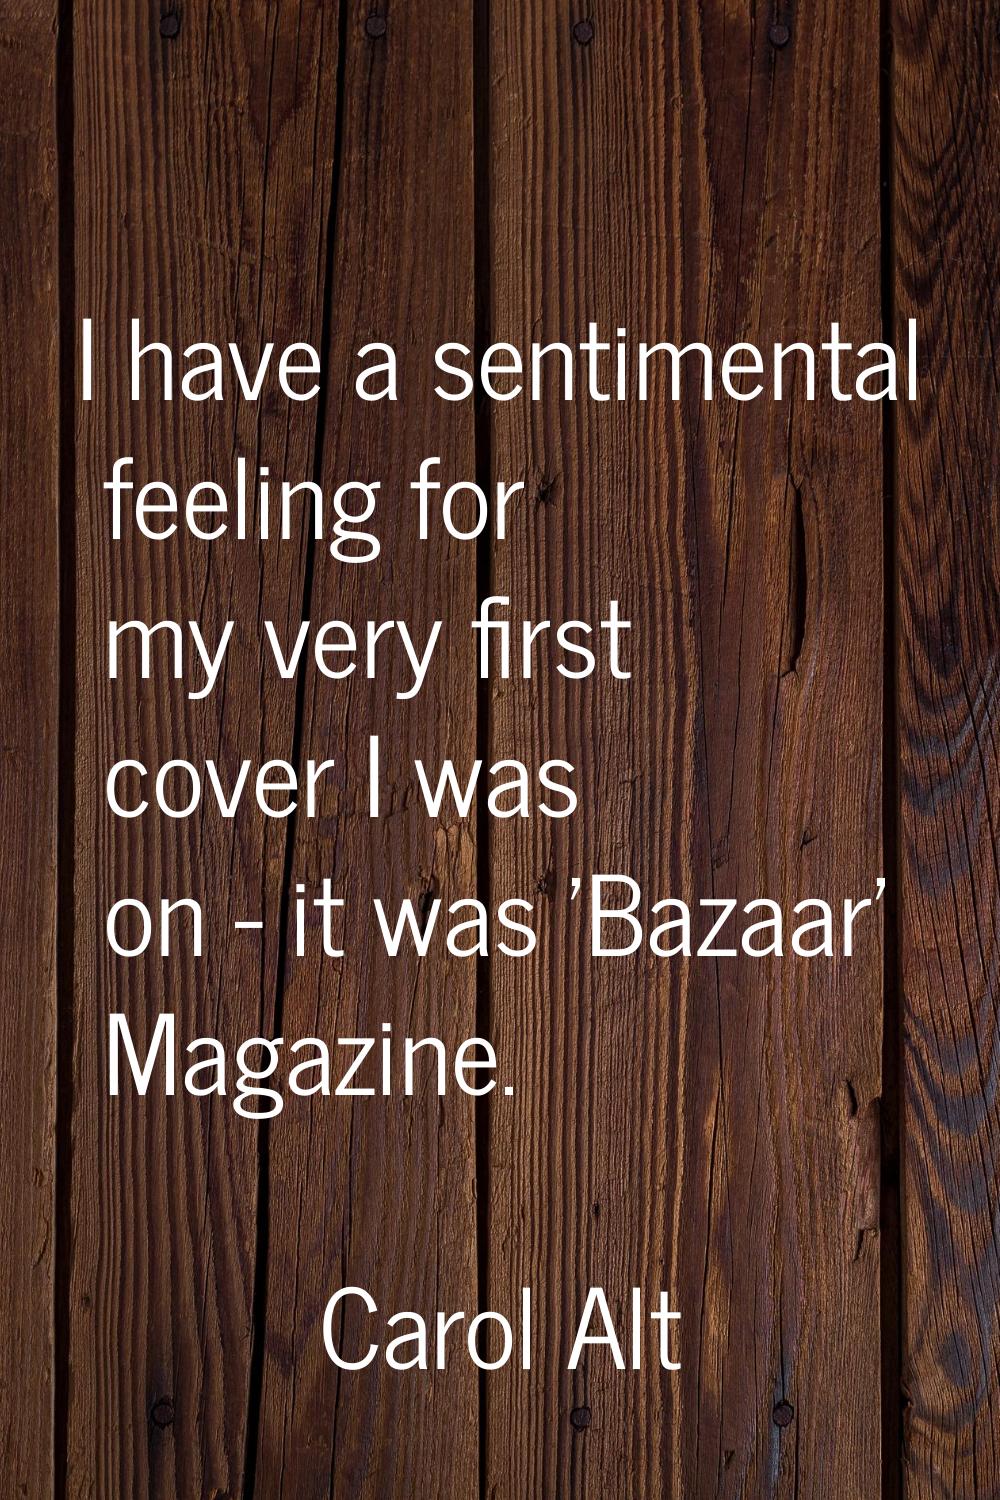 I have a sentimental feeling for my very first cover I was on - it was 'Bazaar' Magazine.